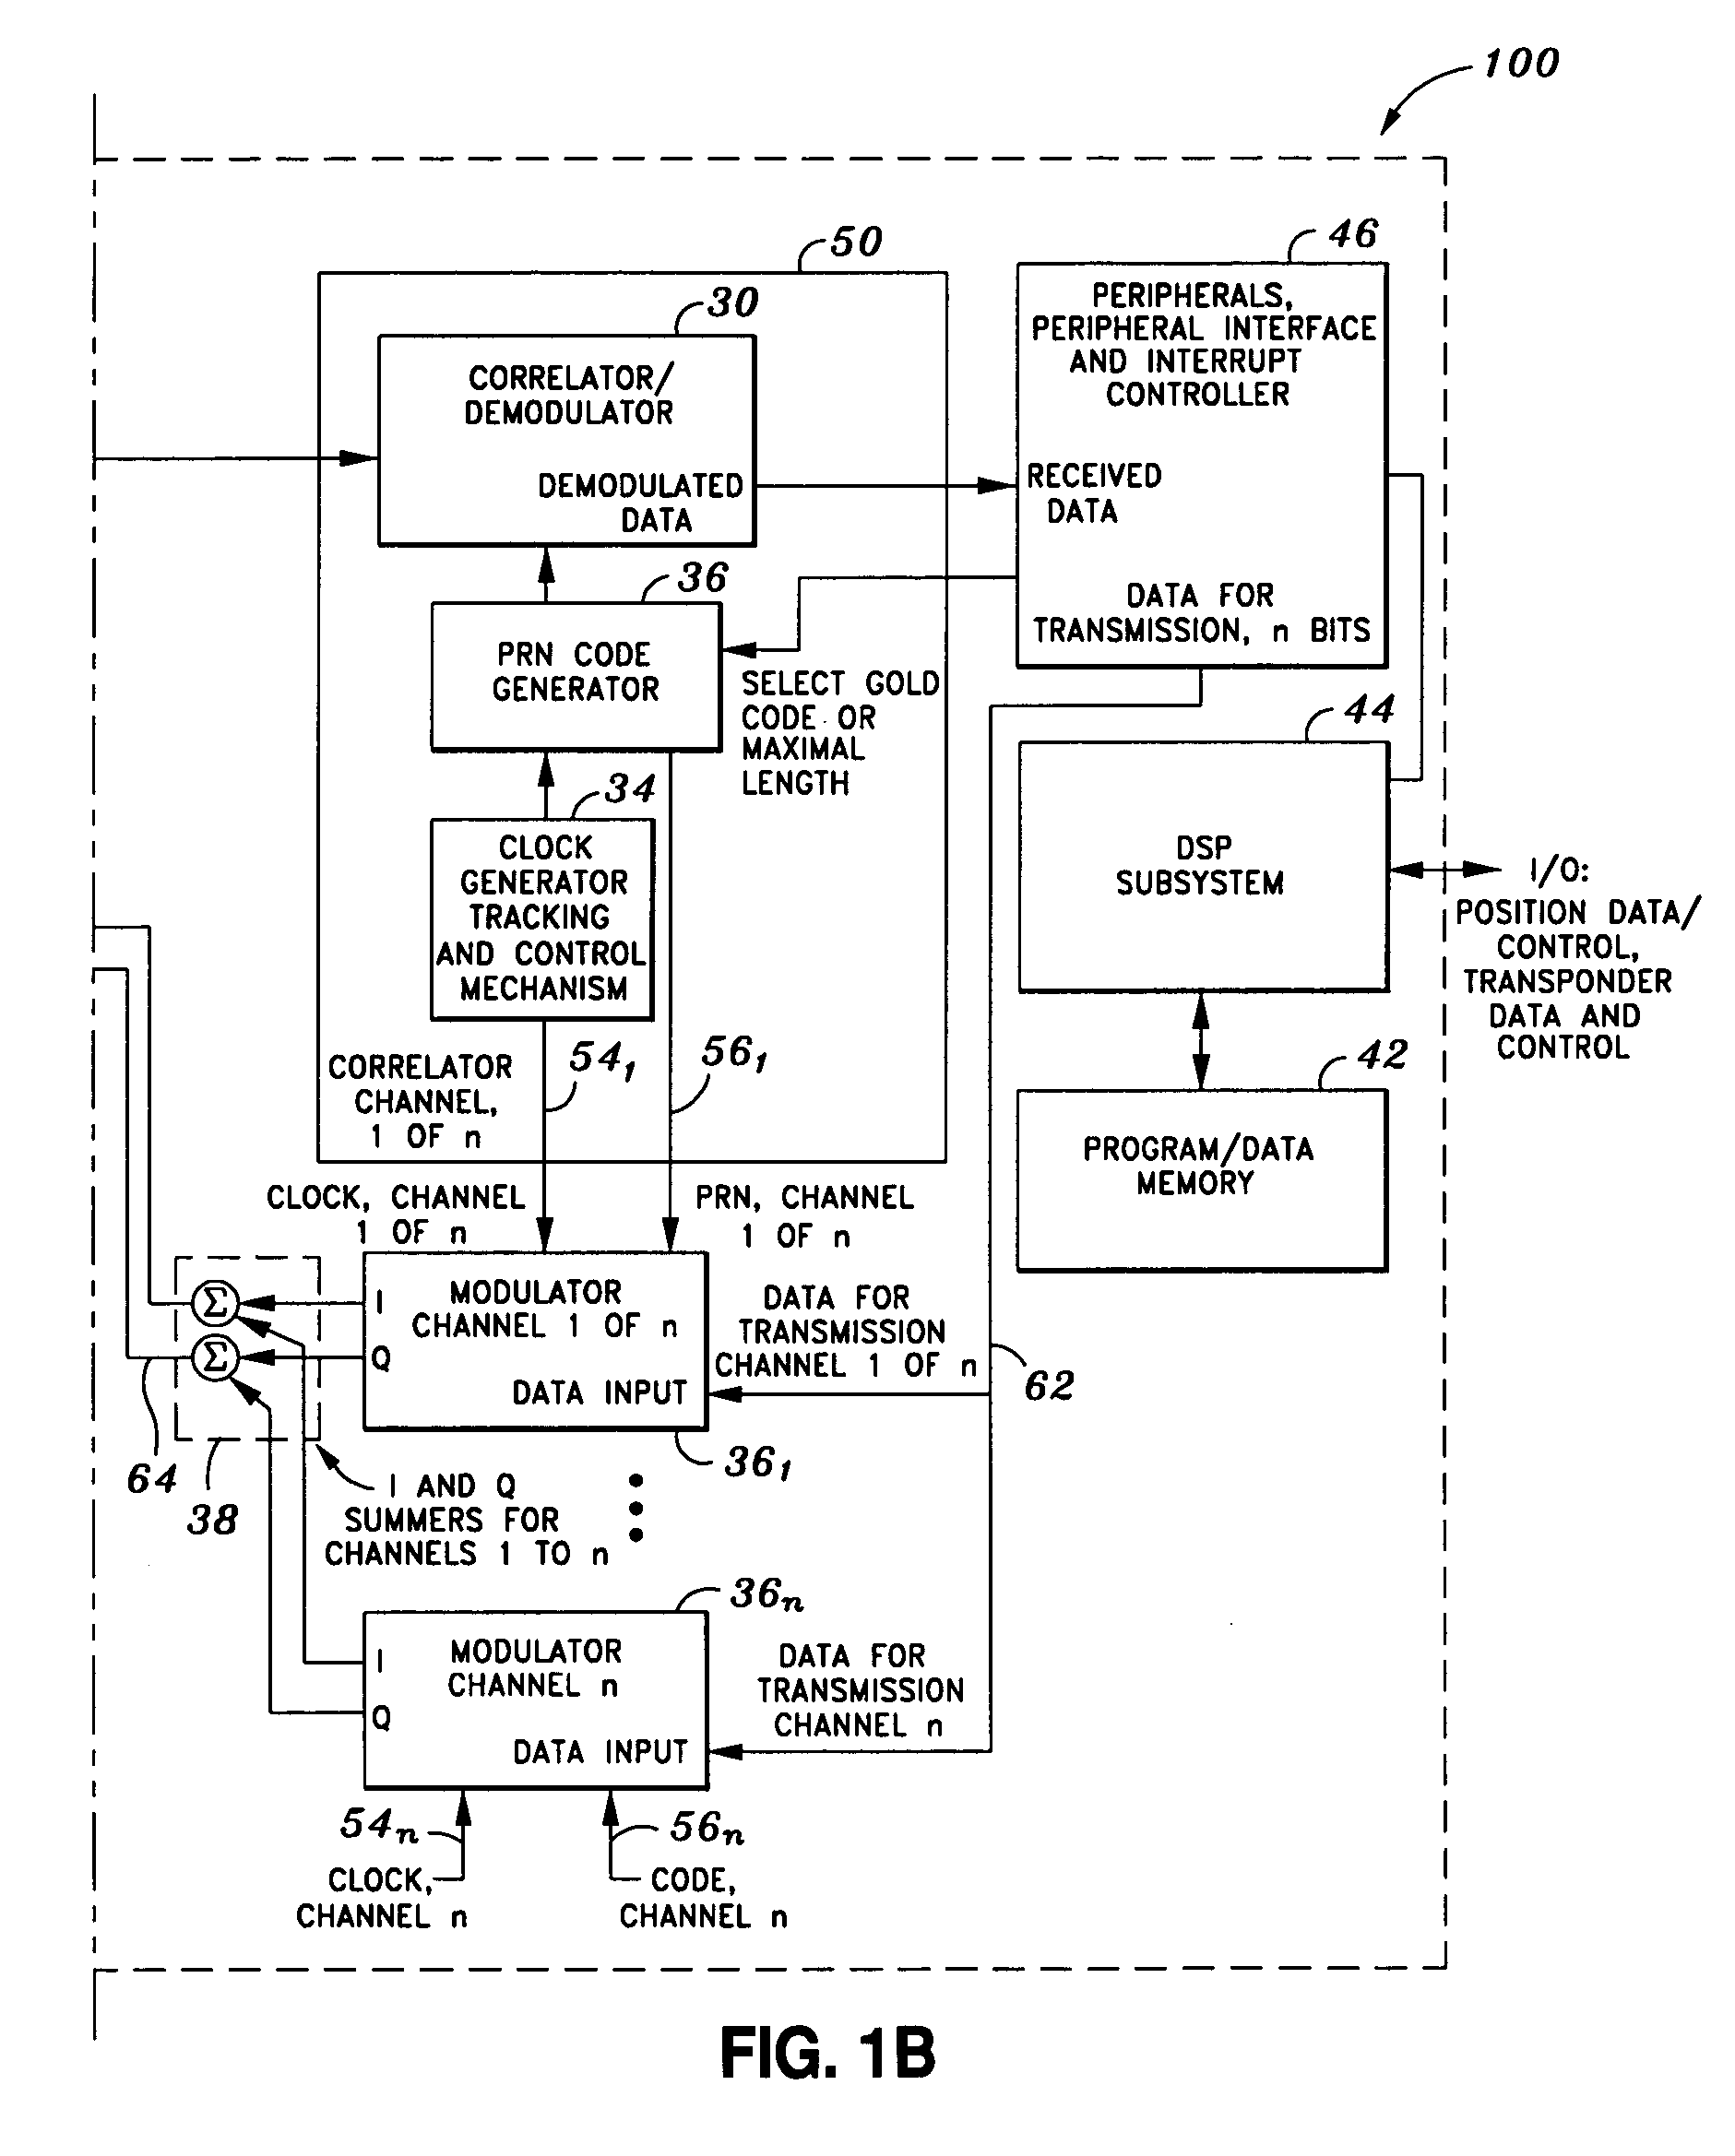 System and method for providing secure communication between network nodes